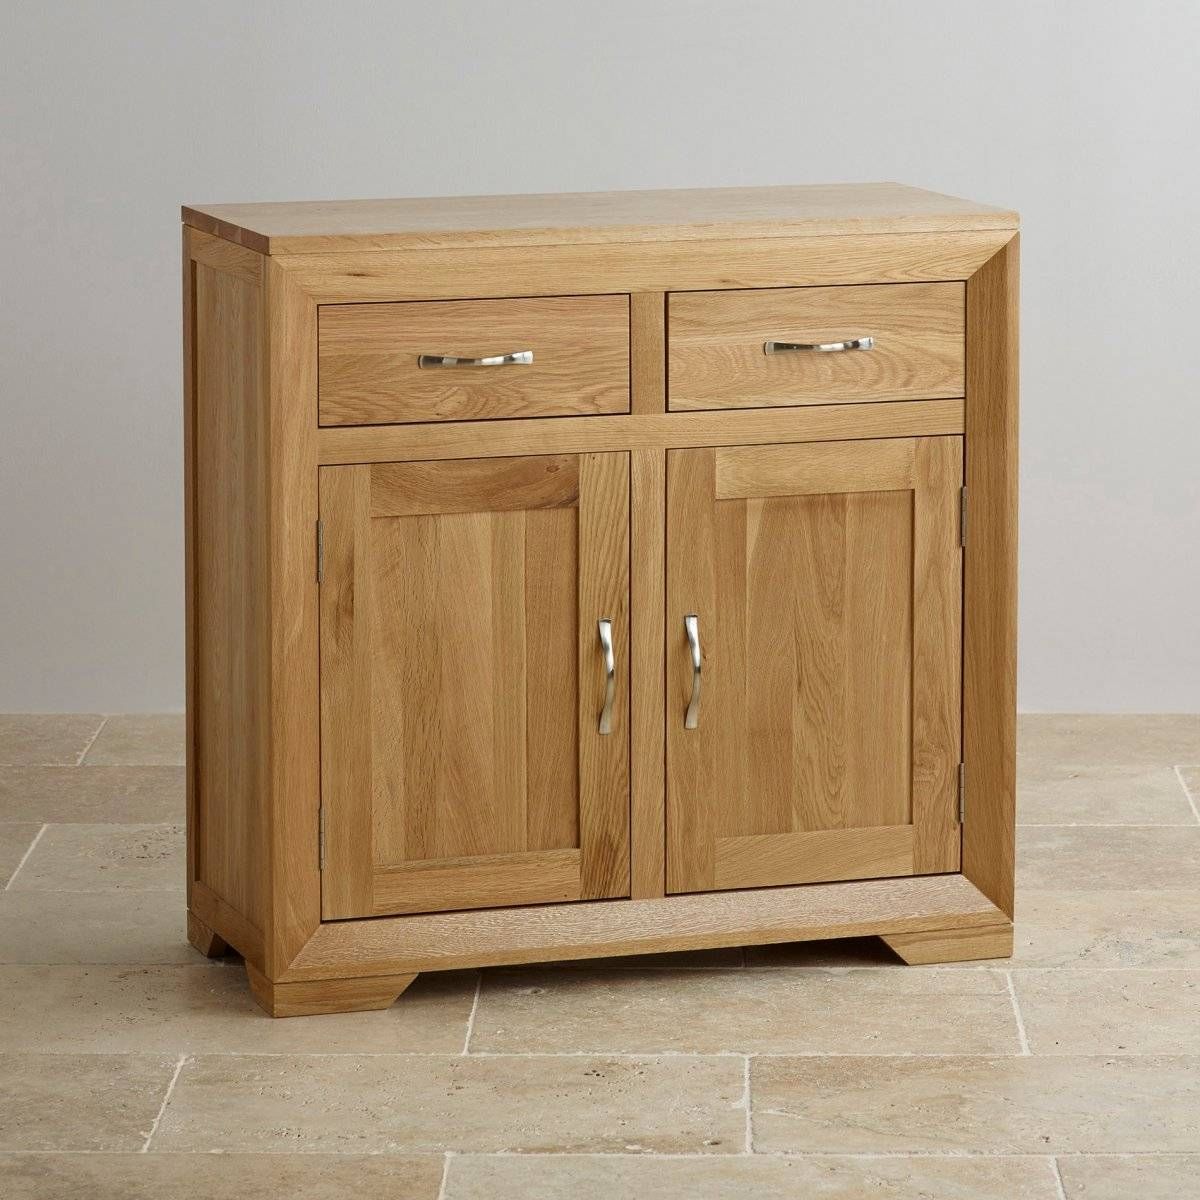 Bevel Small Sideboard In Natural Solid Oak | Oak Furniture Land For Small Sideboards (View 3 of 30)